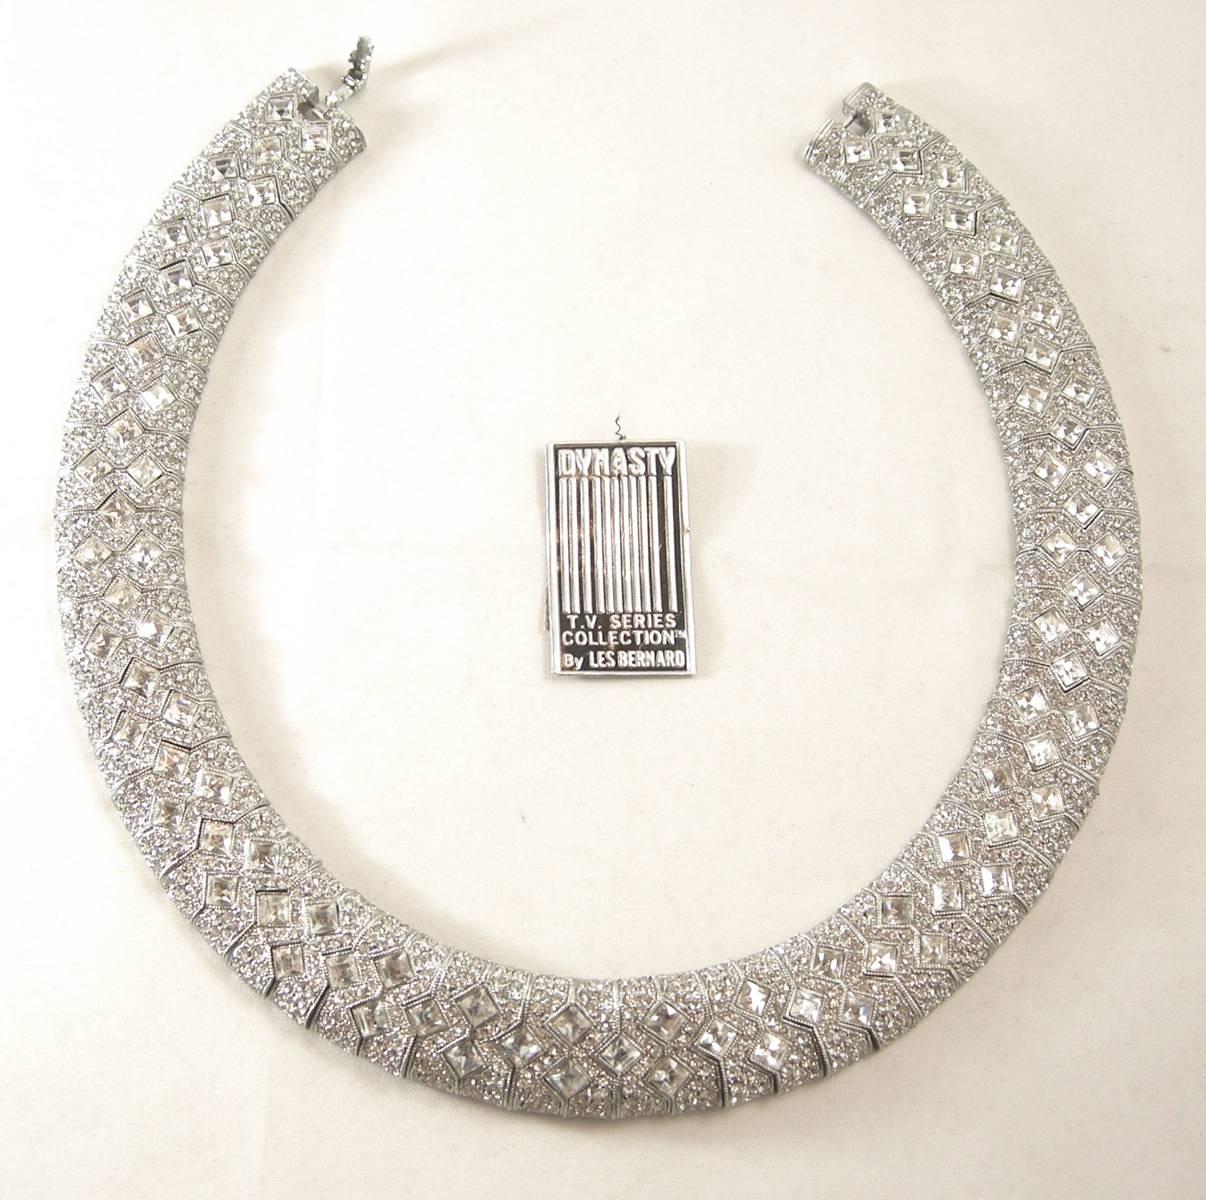 This is an amazing Les Bernard collar Necklace that is part of the Dynasty tv series collection. It is silver plated with crystal pave and shines like real diamonds..  The Glistening necklace measures 17” x 3/8” and has a fold over clasp. It is